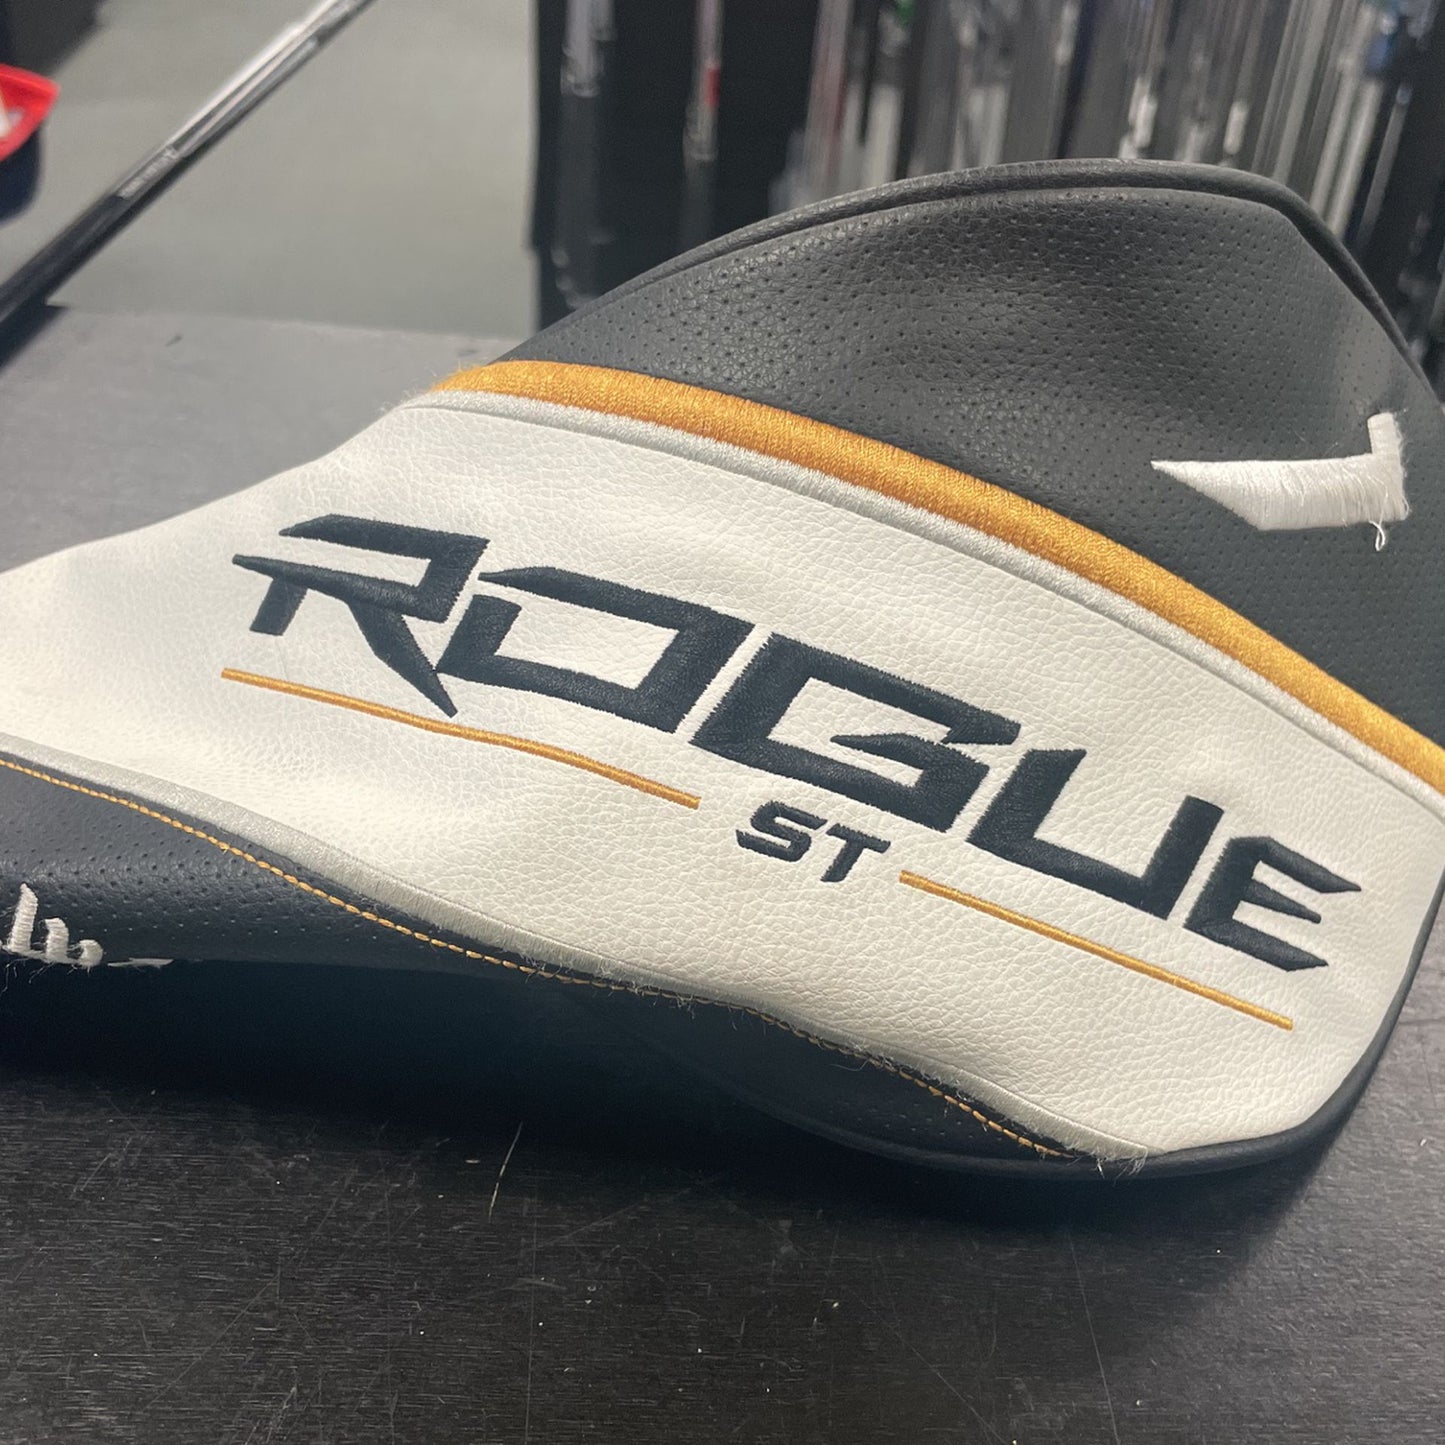 Callaway-Rogue-ST-Max-LS-Driver-9-degree-right-hand-stiff-flex-with-headcover